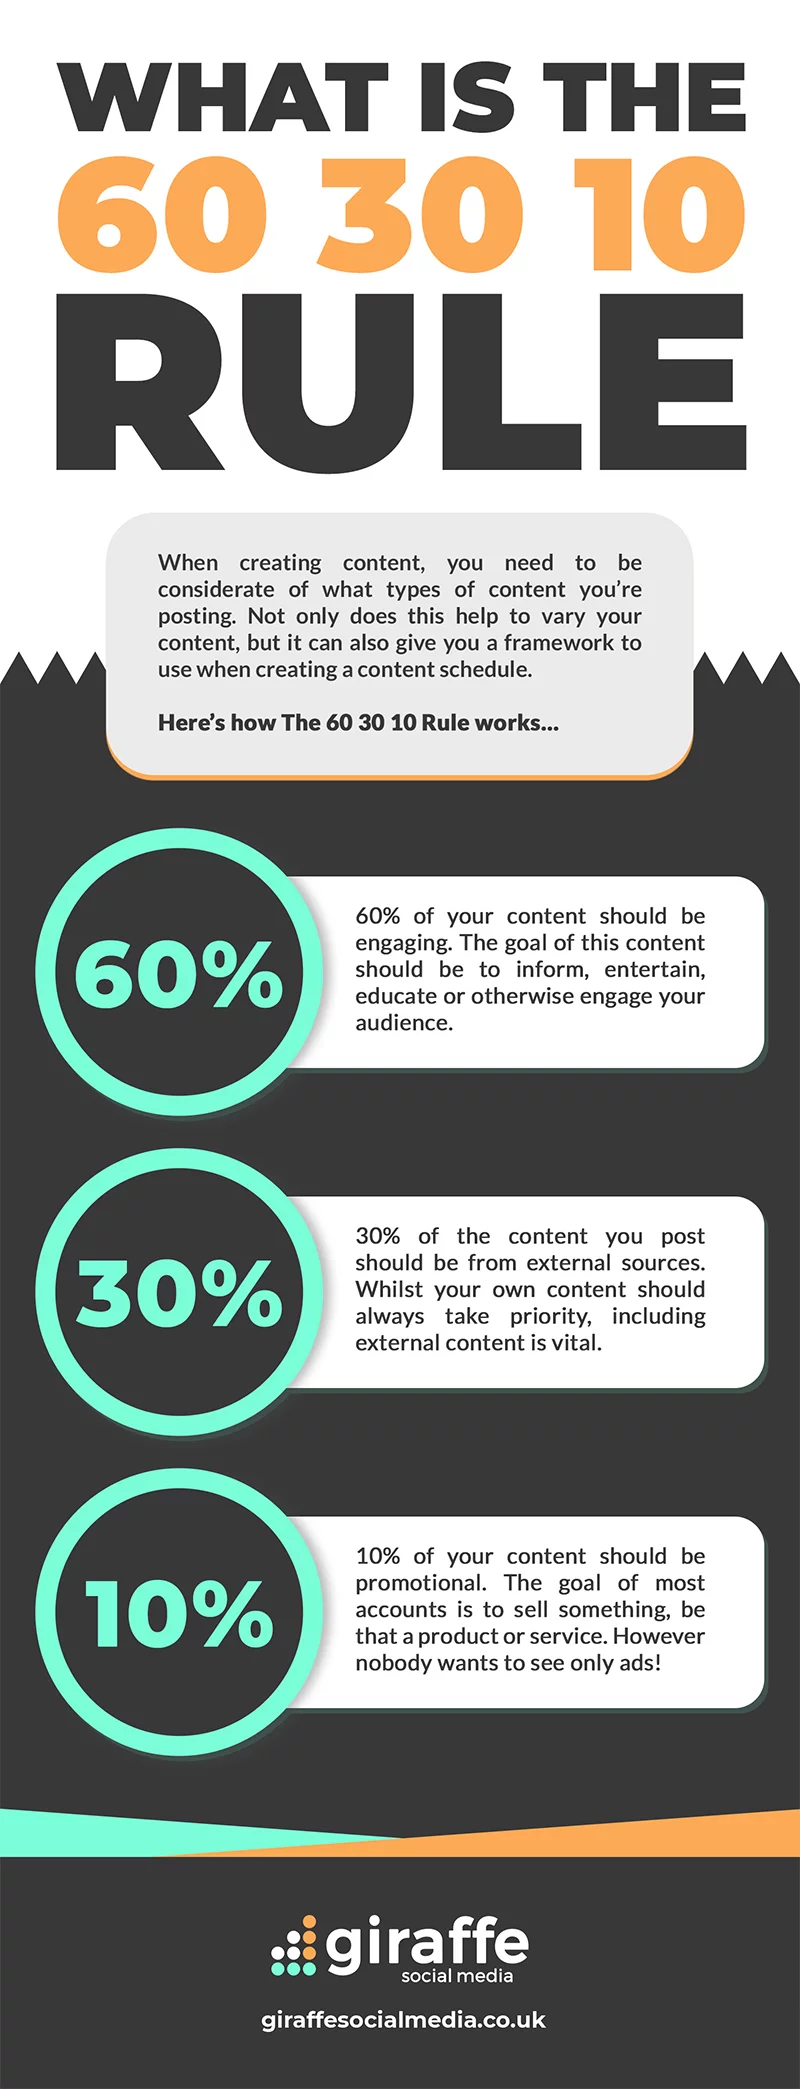 The 60 30 10 rule you should apply to your social media content.jpg